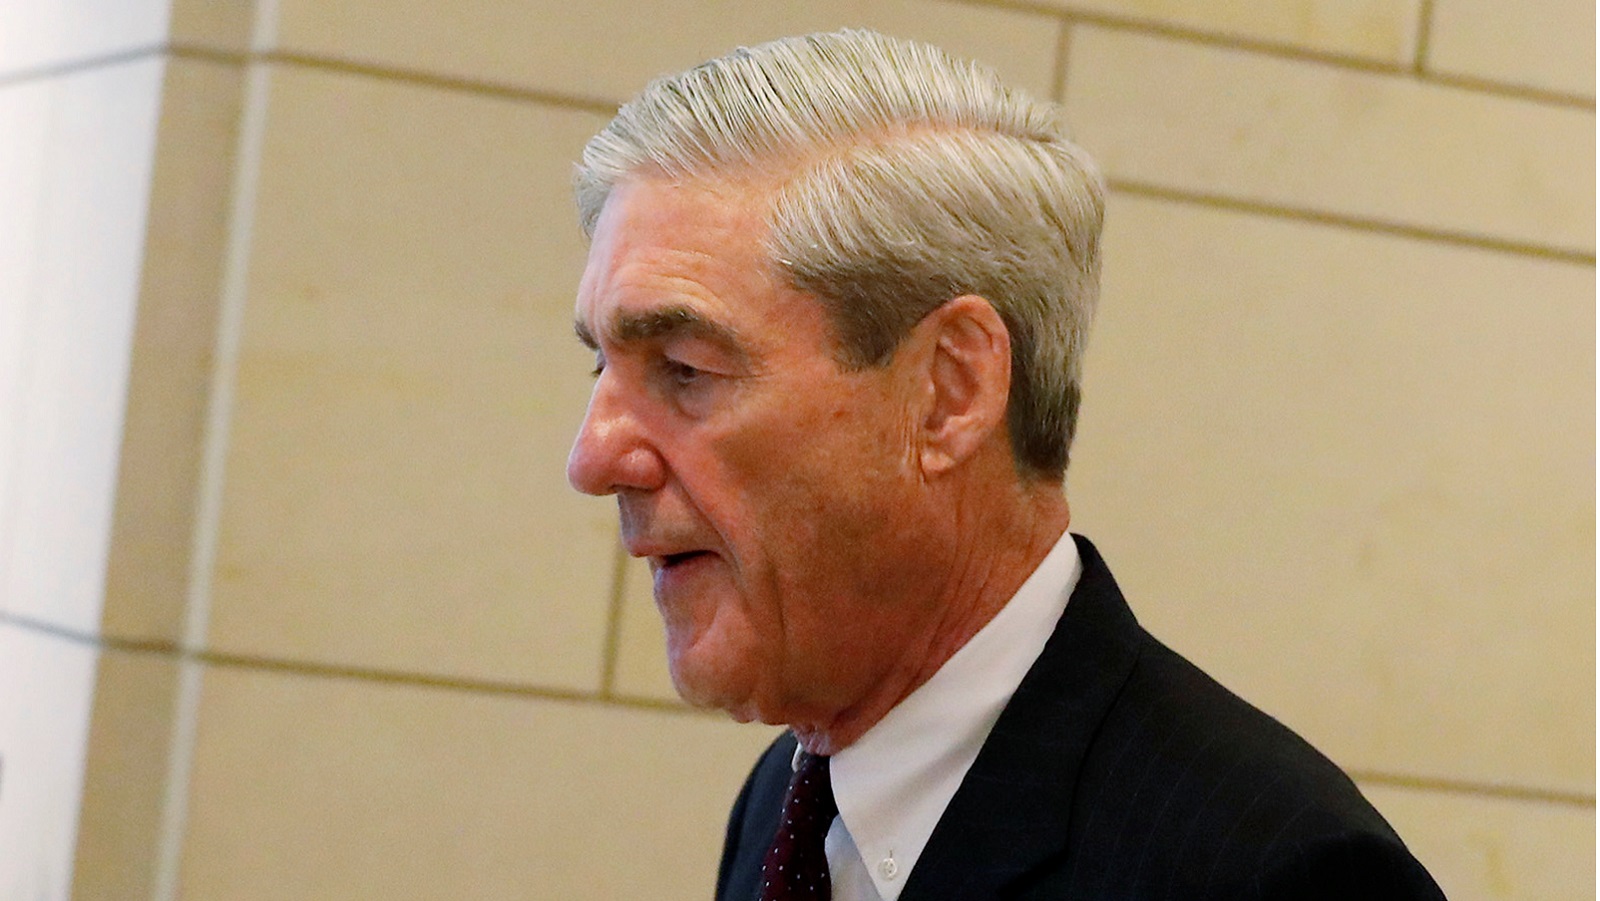 Mueller Investigation Gates Deal Violates Federal Policy National Review